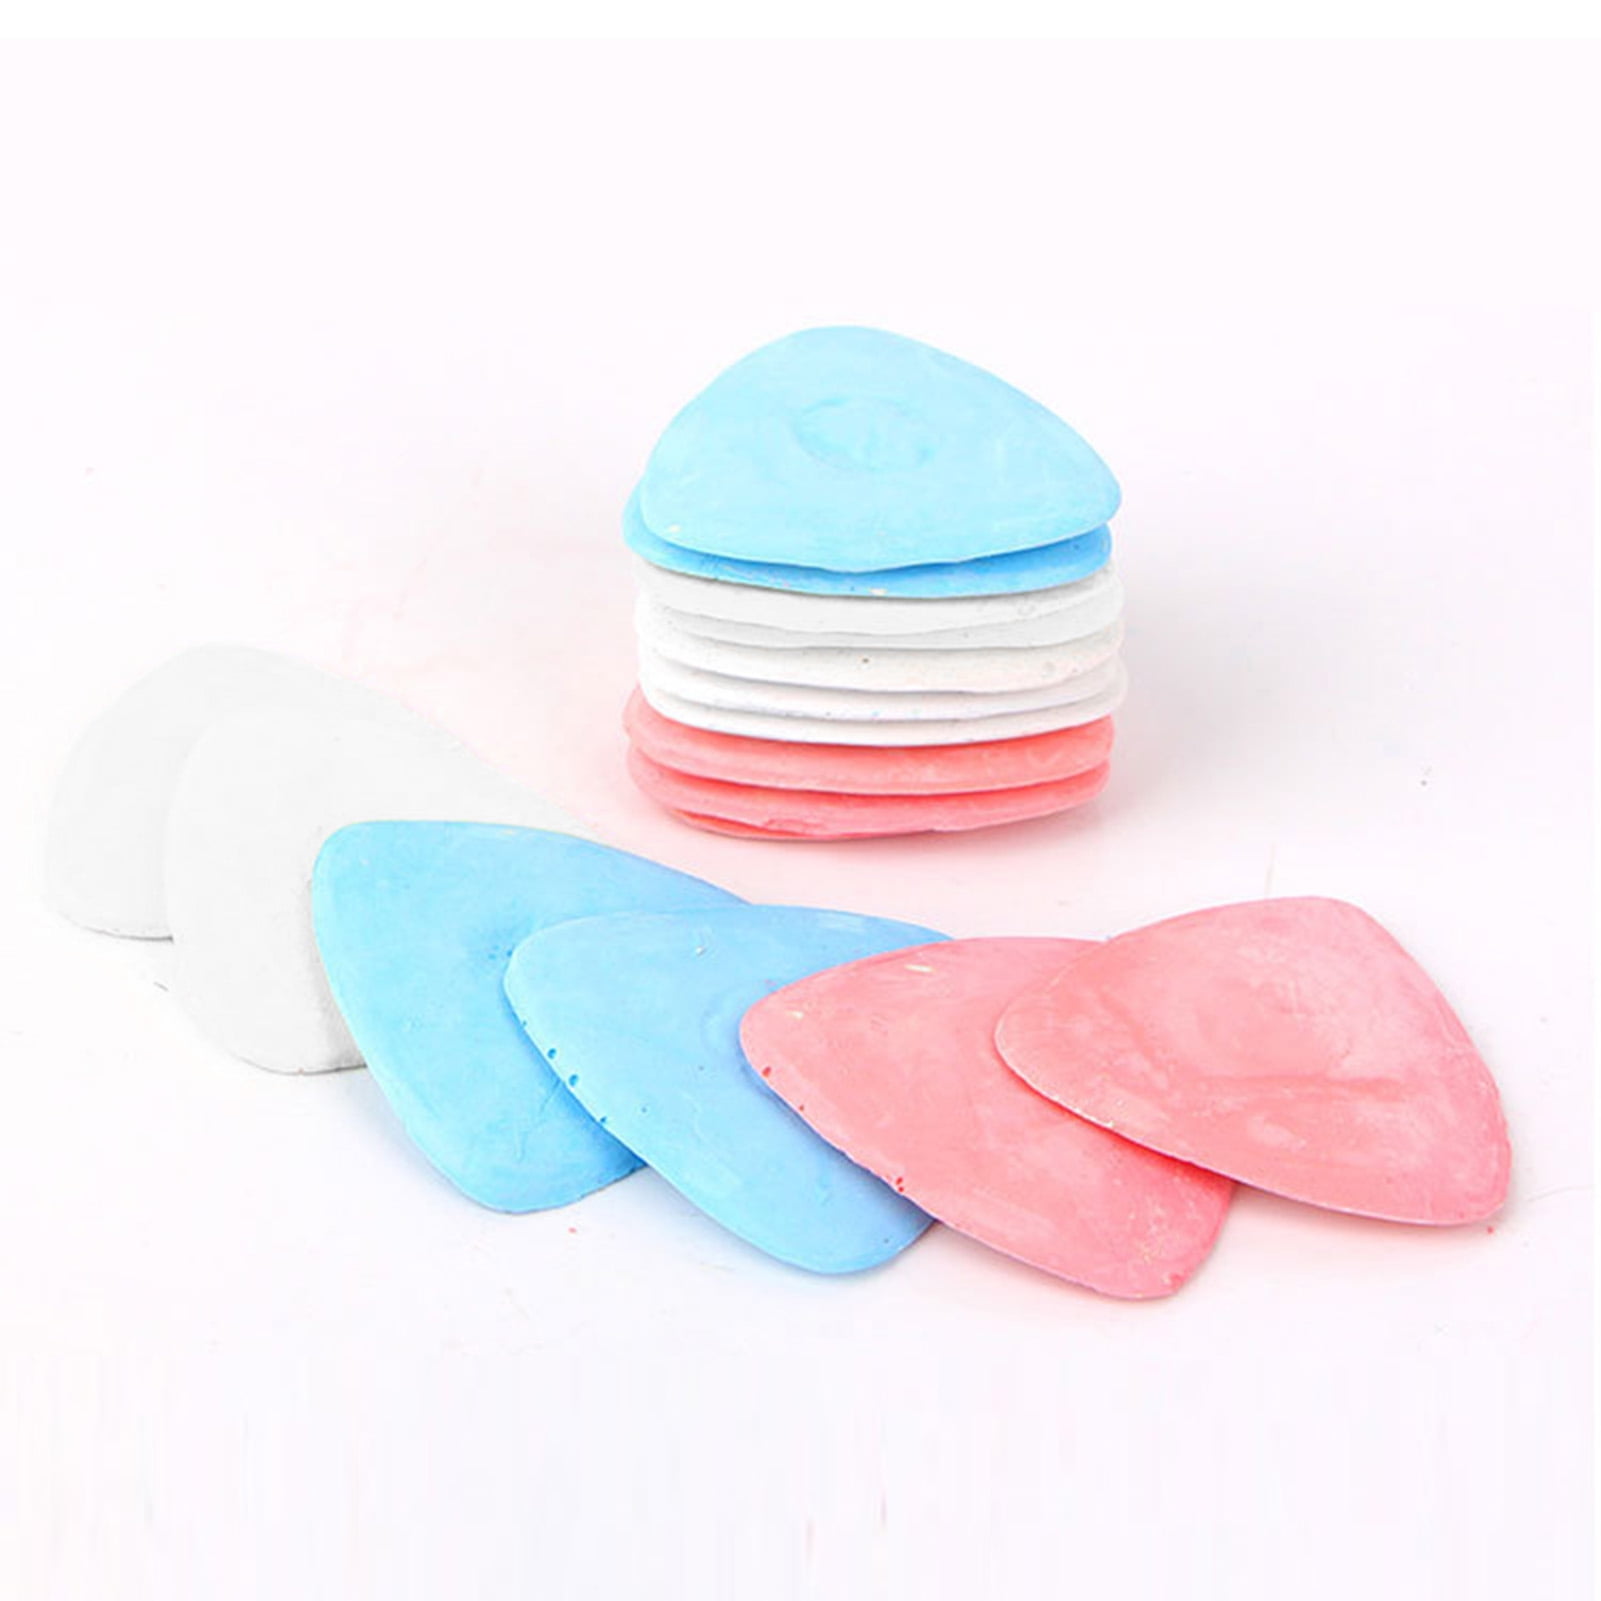 Hesroicy 30Pcs/Box Fabric Chalk Smooth Clear Trace Powder Thicken  Multicolor Clothes Chalk for Patchwork